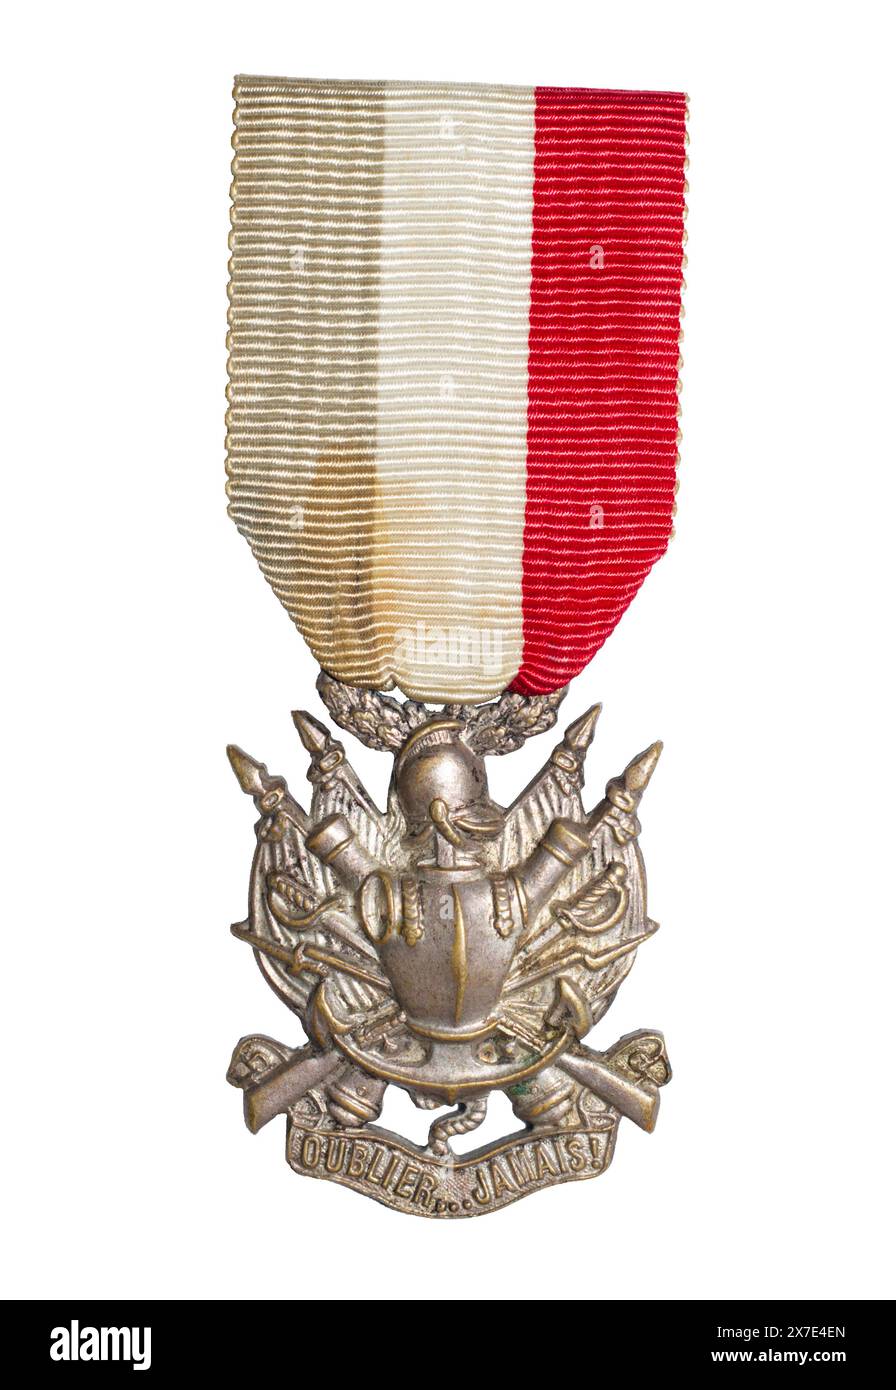 Veterans Medal - an unofficial campaign medal for French veterans of the Franco-Prussian War (1870-1871), c. 1890s. Stock Photo